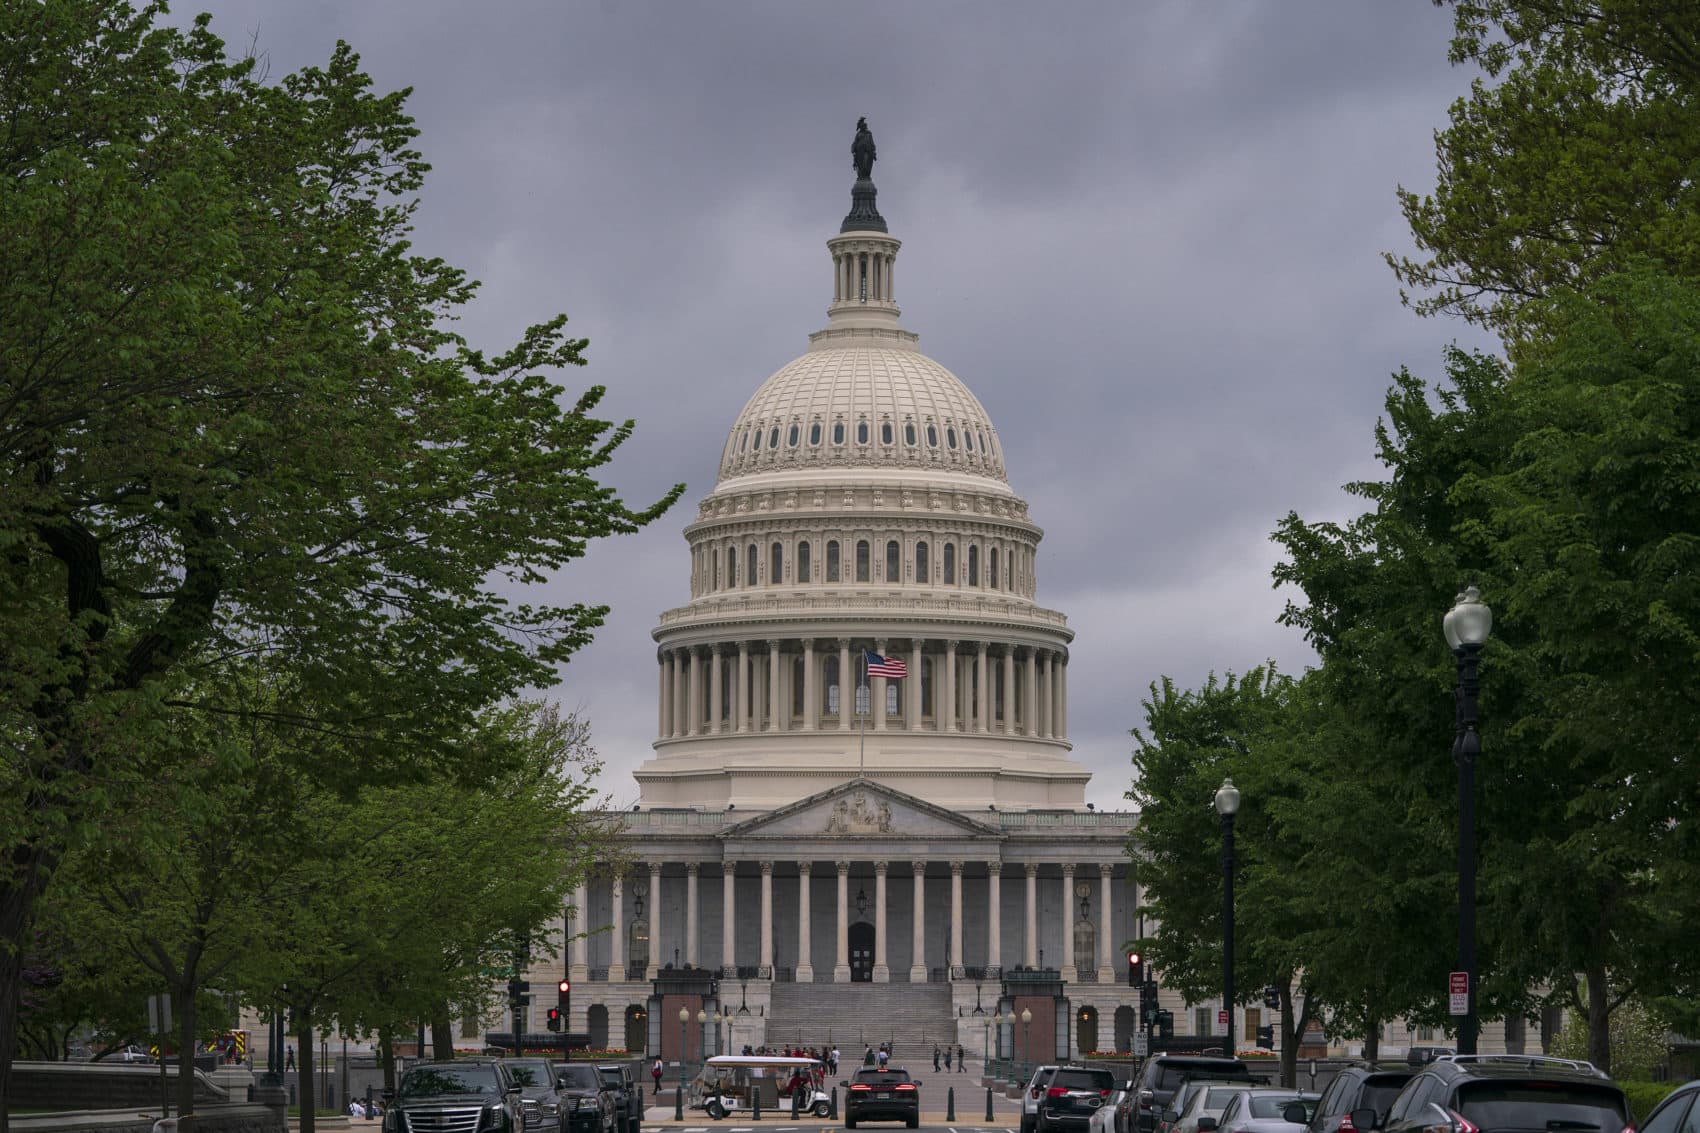 The Capitol is seen in Washington, Friday, April 19, 2019, the day after Attorney General William Barr released a redacted version of special counsel Robert Mueller's investigation into Russian interference in the 2016 U.S. election. (J. Scott Applewhite/AP)